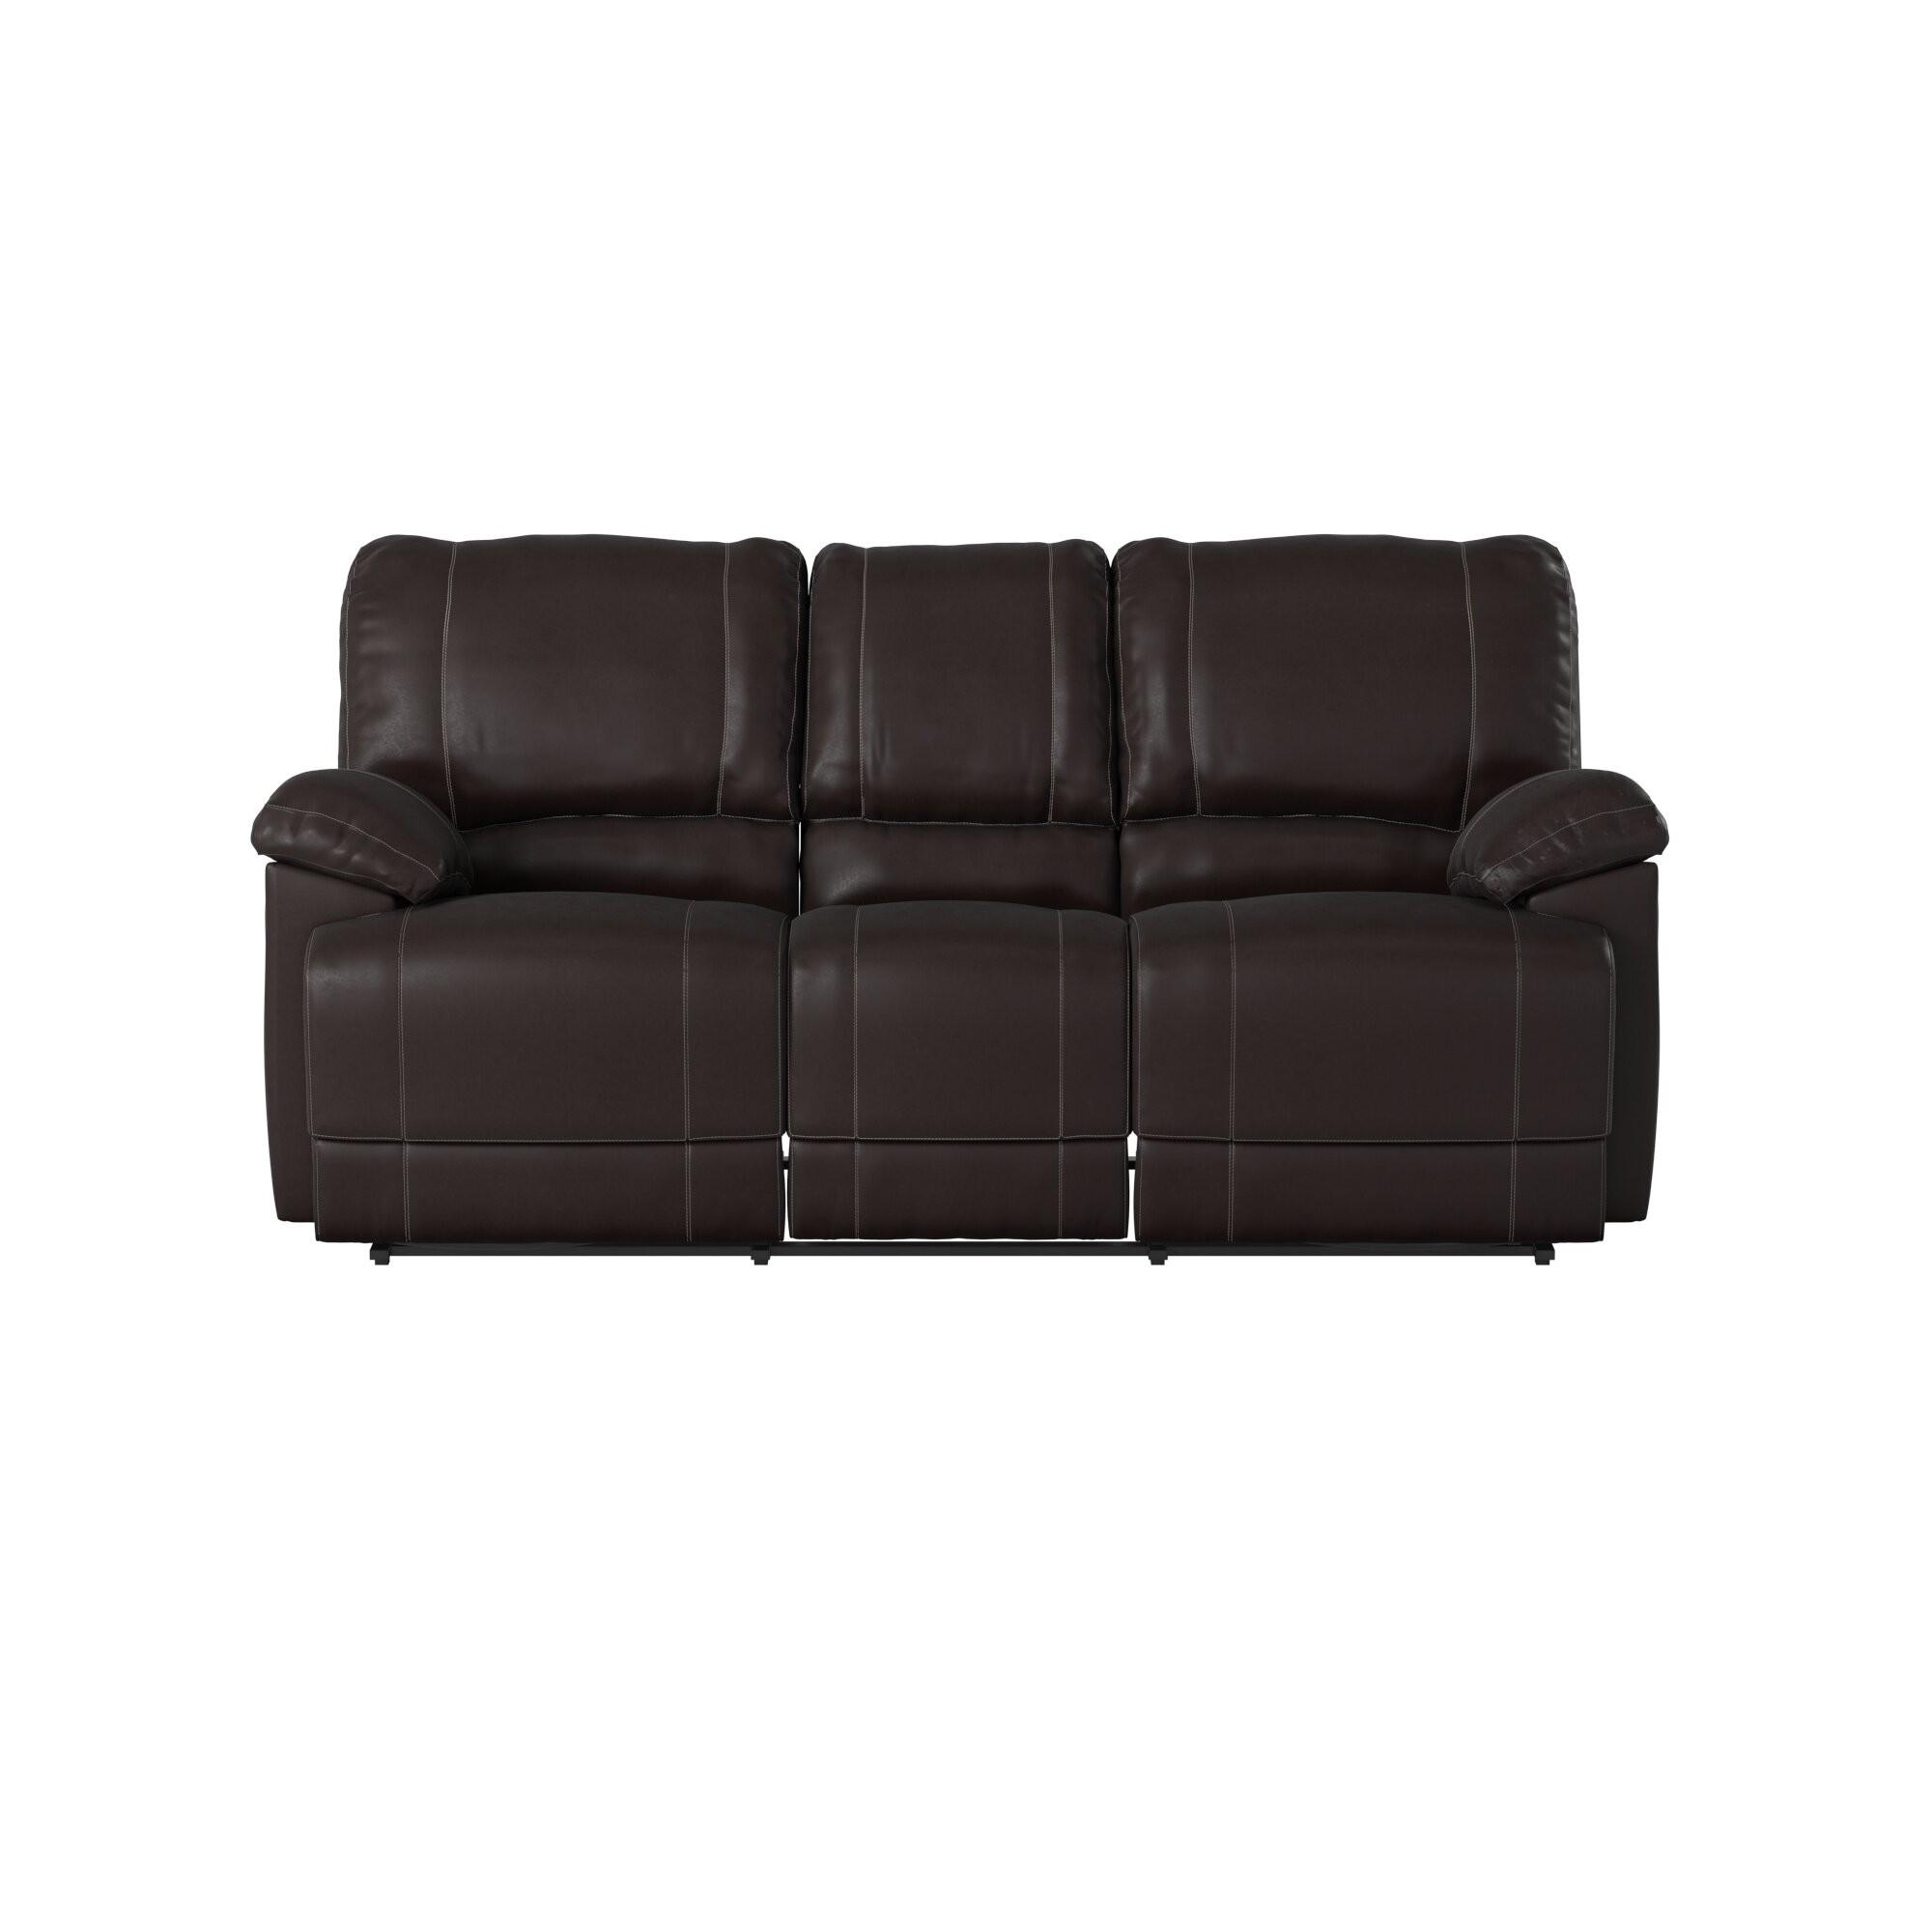 Transitional Reclining Loveseat Cassville Loveseat 8403-2-L 8403-2-L in Brown Faux Leather